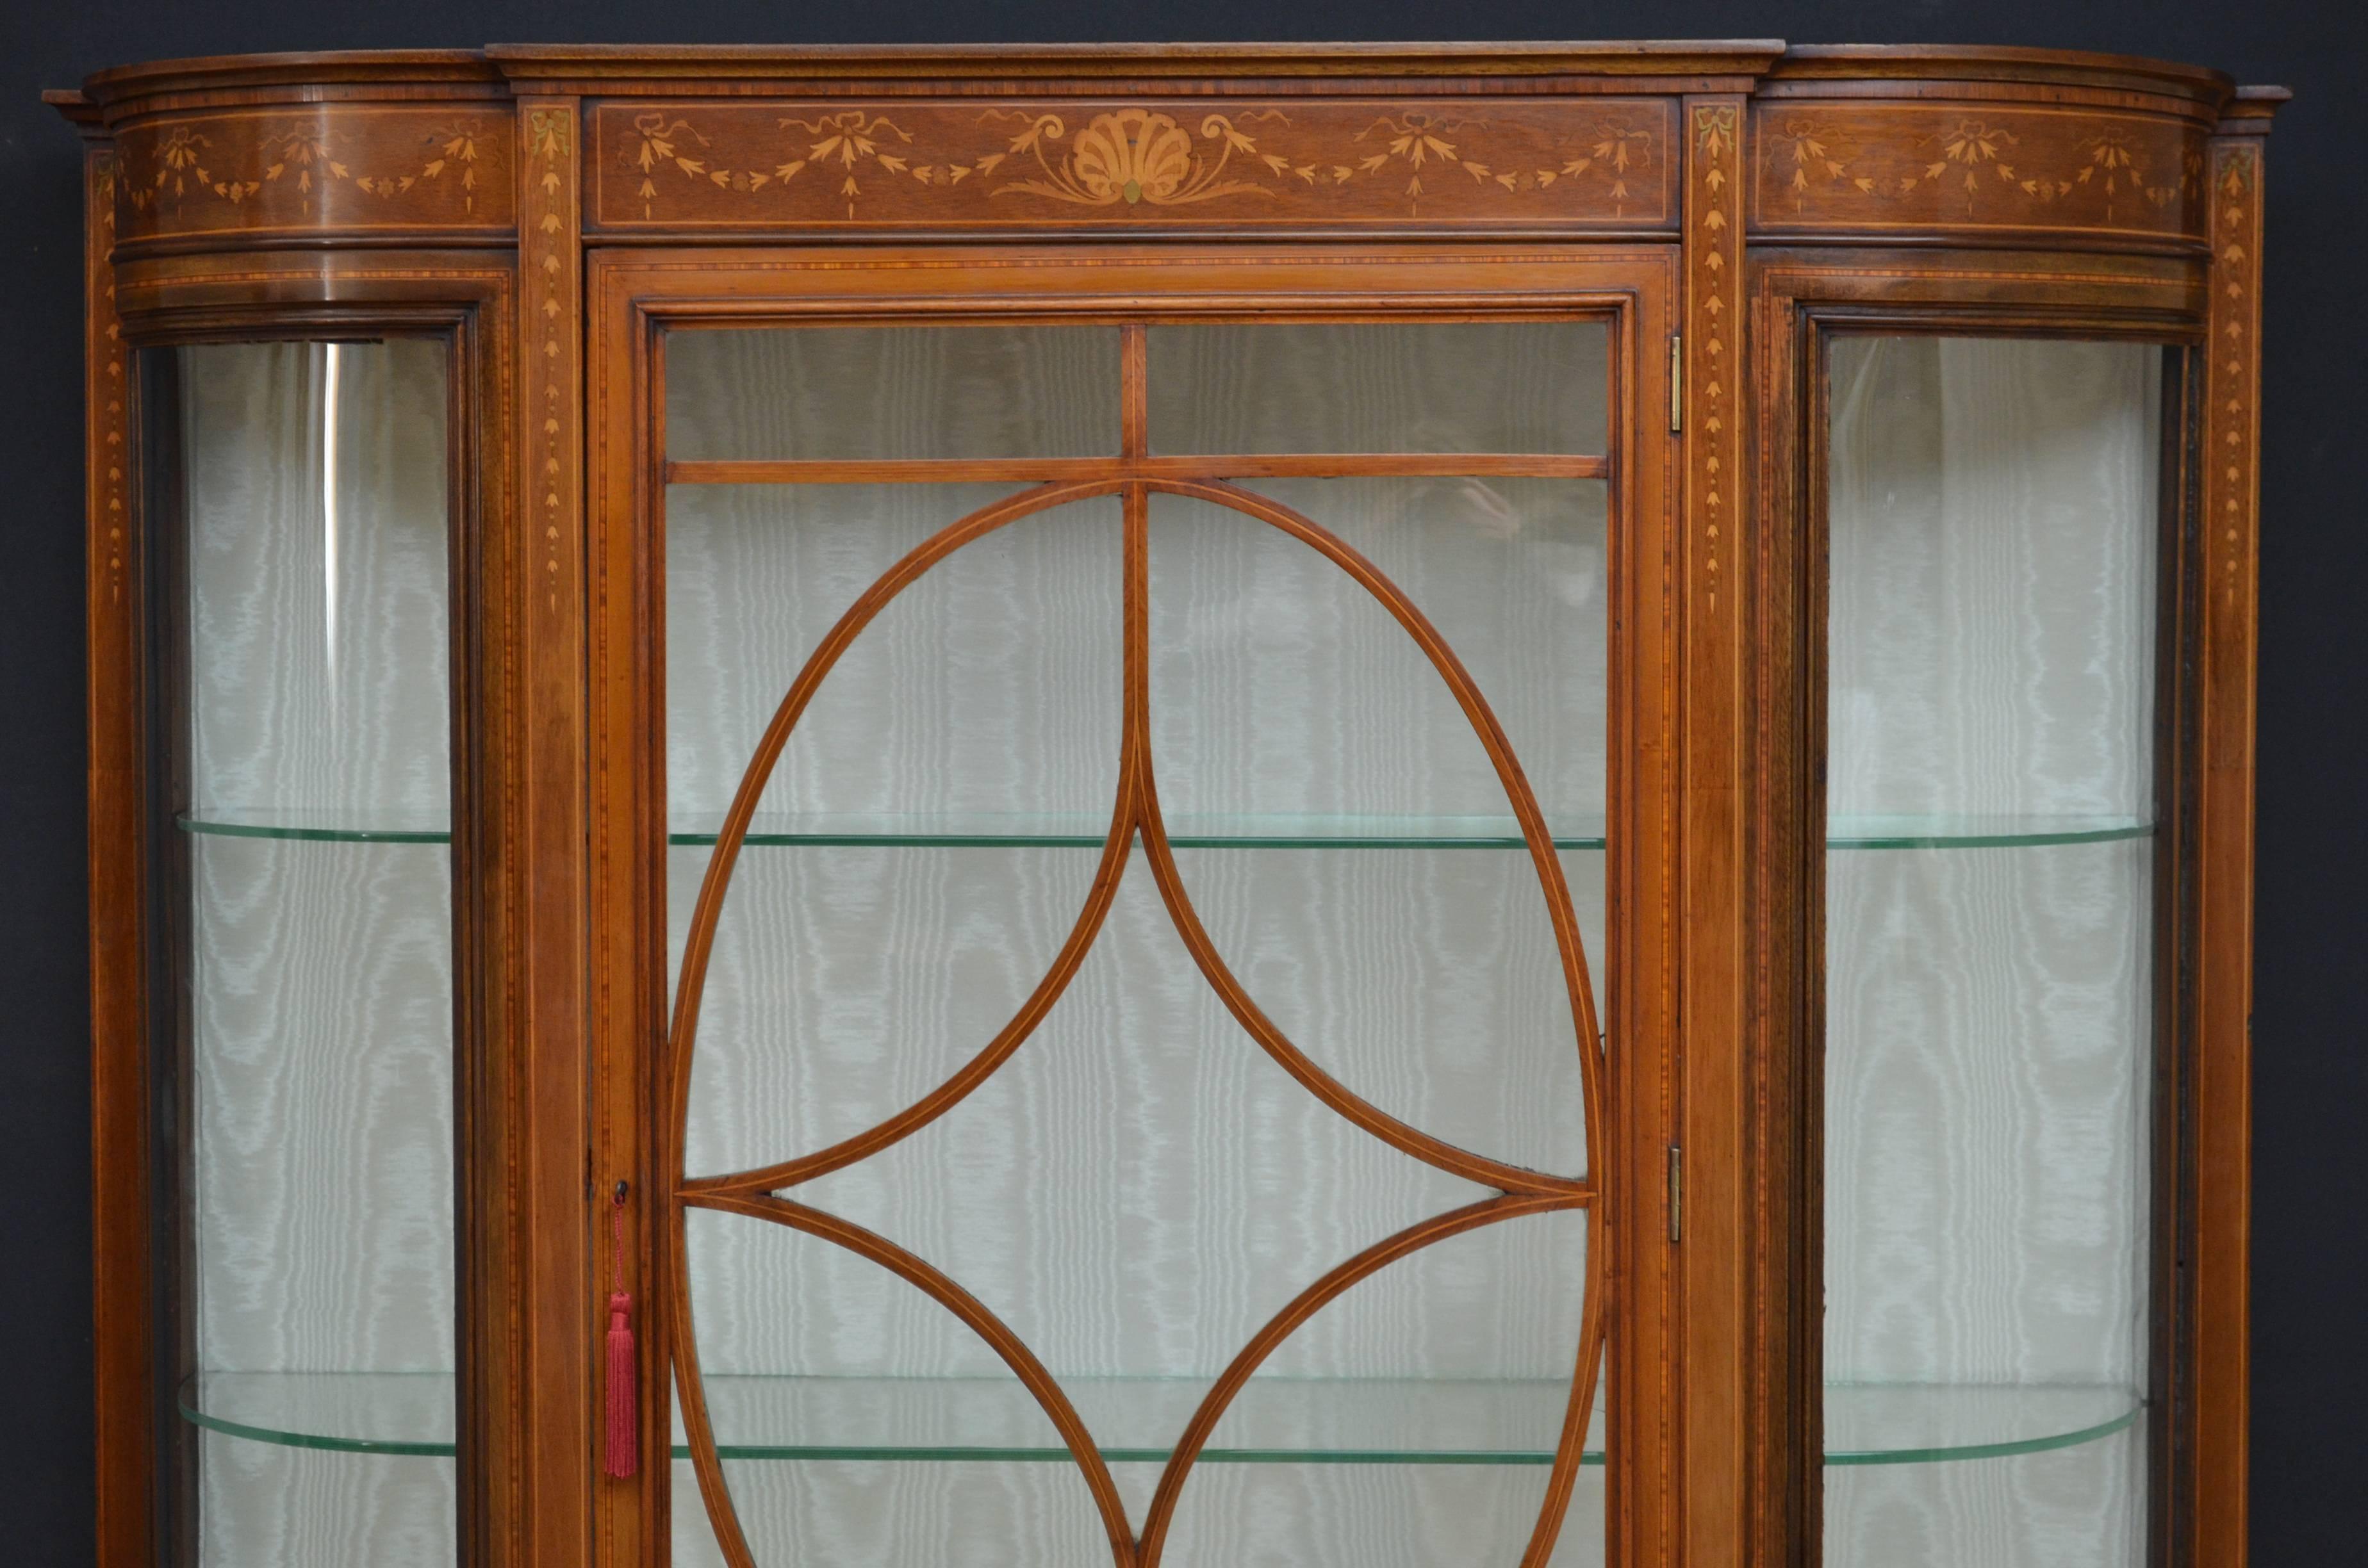 K0106, fine quality and very elegant, Edwardian, mahogany and inlaid display cabinet, vitrine of good proportions, having molded cornice. Fine marquetry frieze depicting harebell, swags and shell to center above glazed door with original working